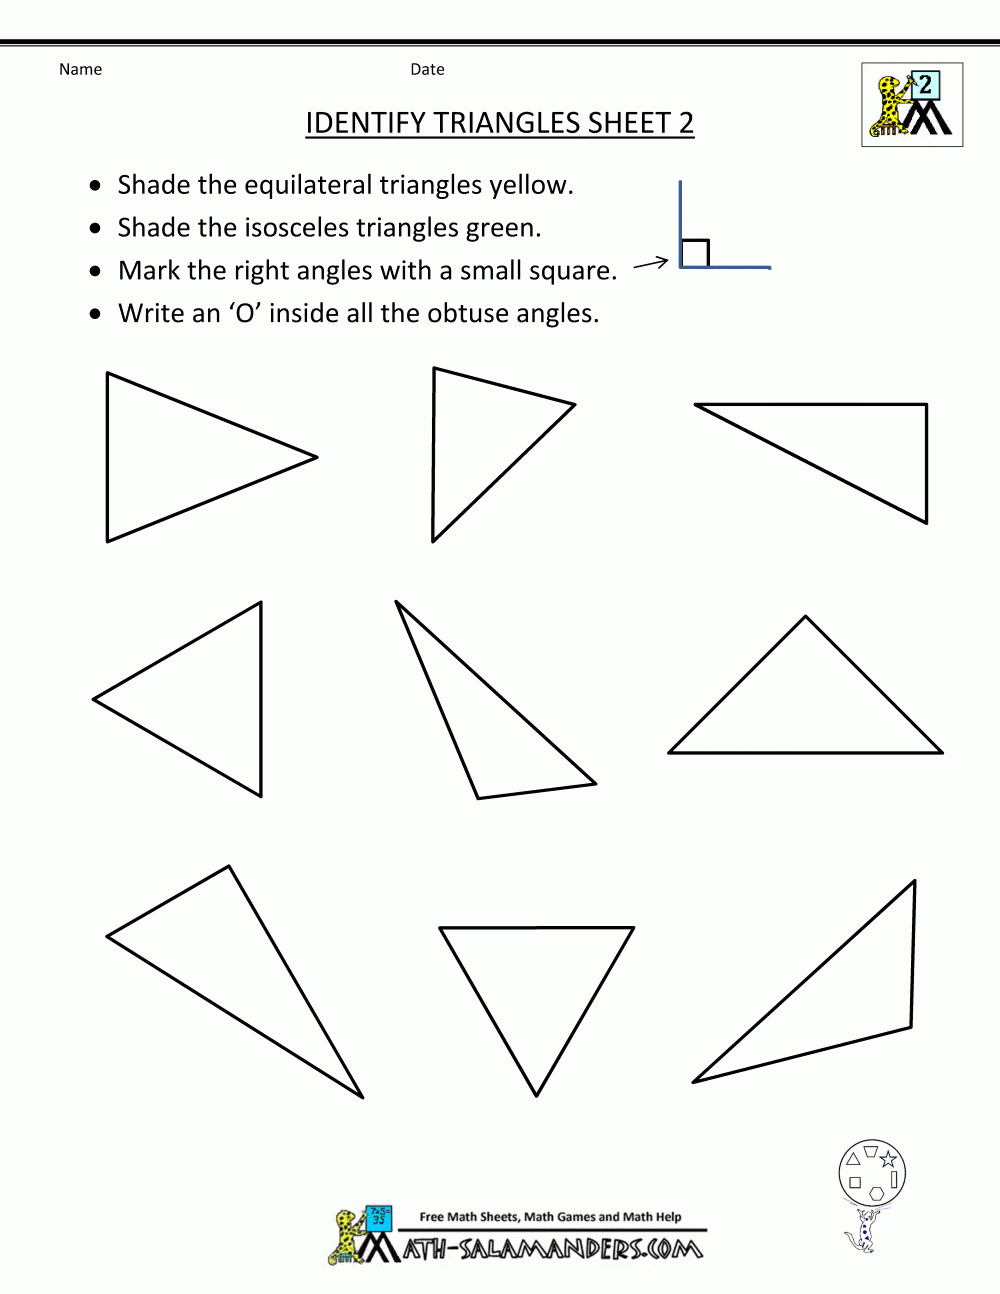 2D Shapes Worksheets - Free Printable Geometry Worksheets For Middle School